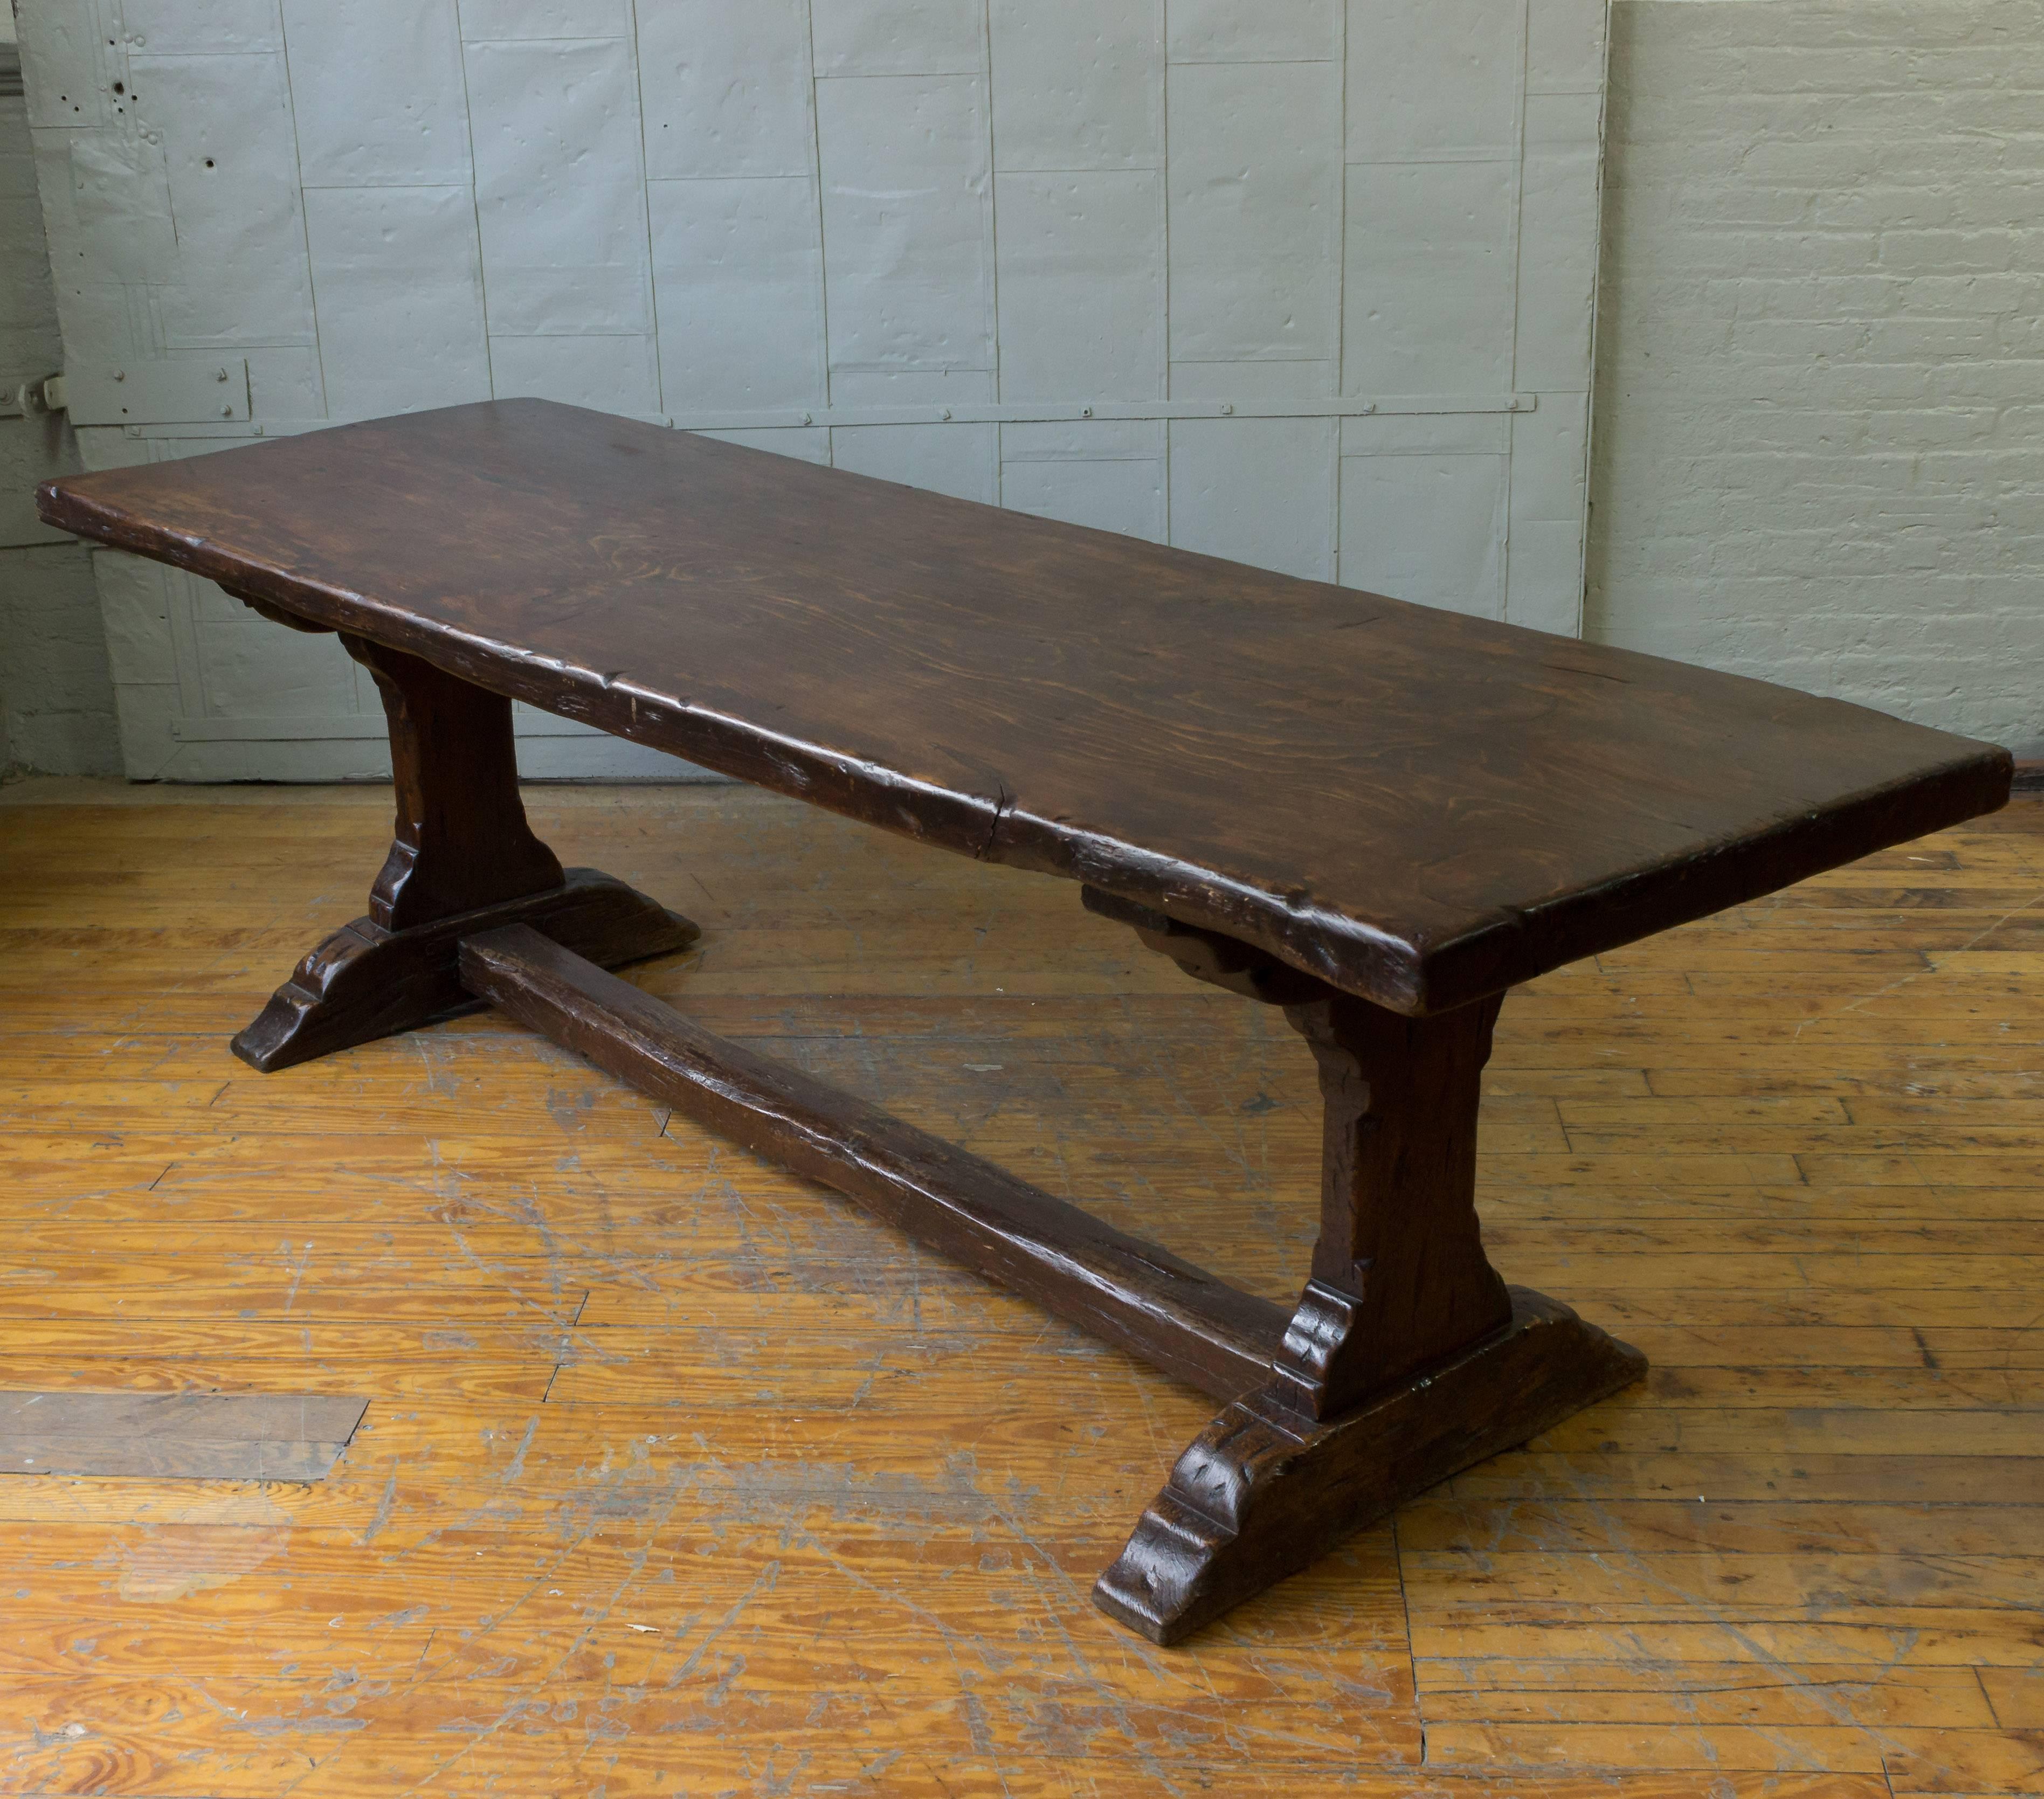 Early 19th century, French monastery table made from walnut. The top is made from a single piece of wood.